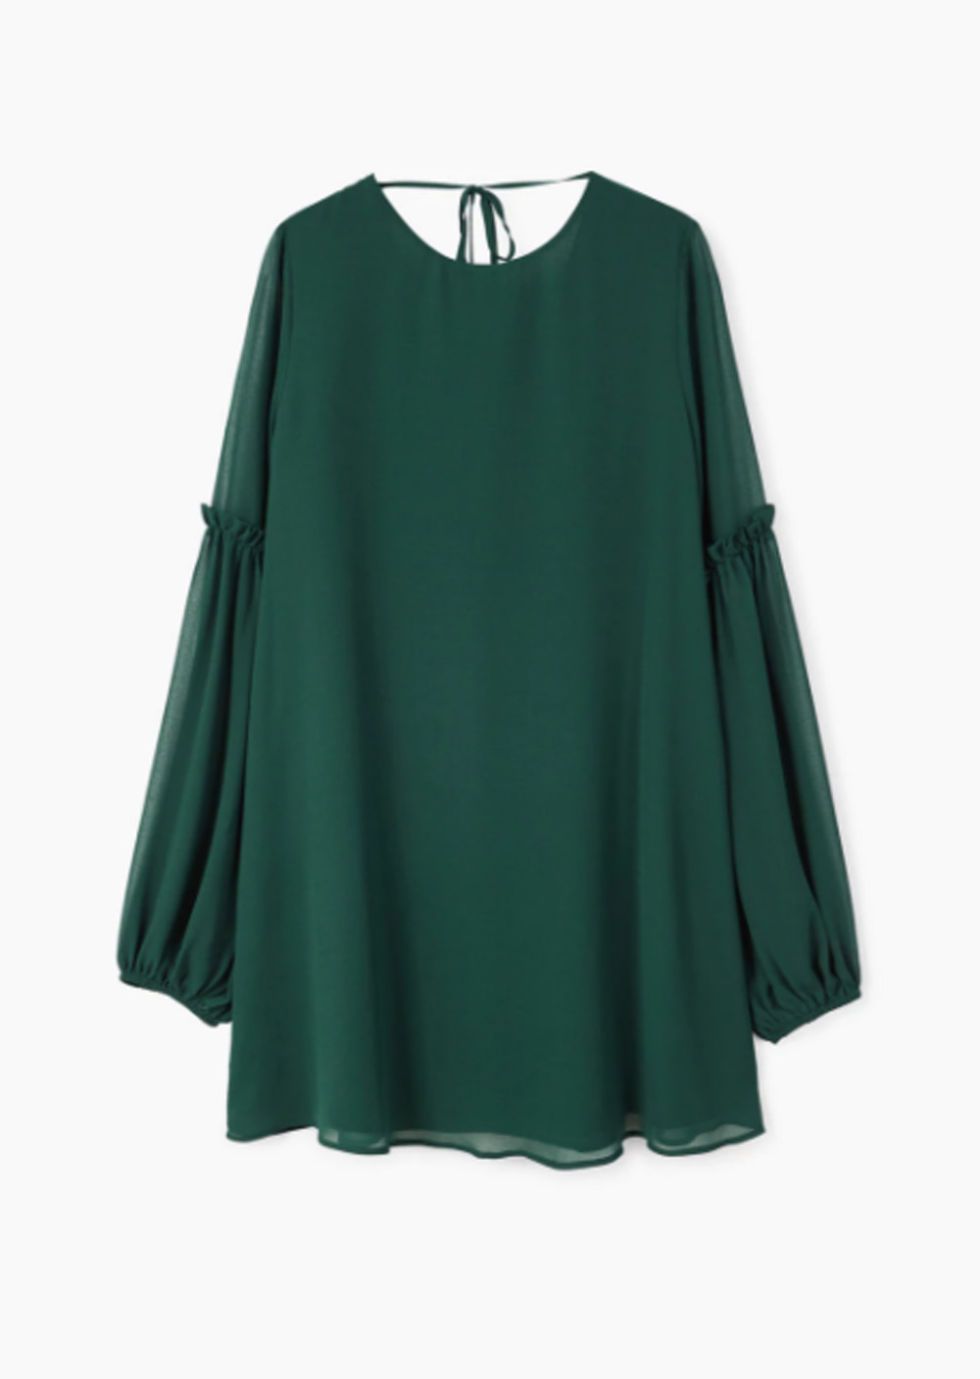 Clothing, Green, Sleeve, Blouse, Outerwear, Turquoise, Neck, Shoulder, Dress, Top, 